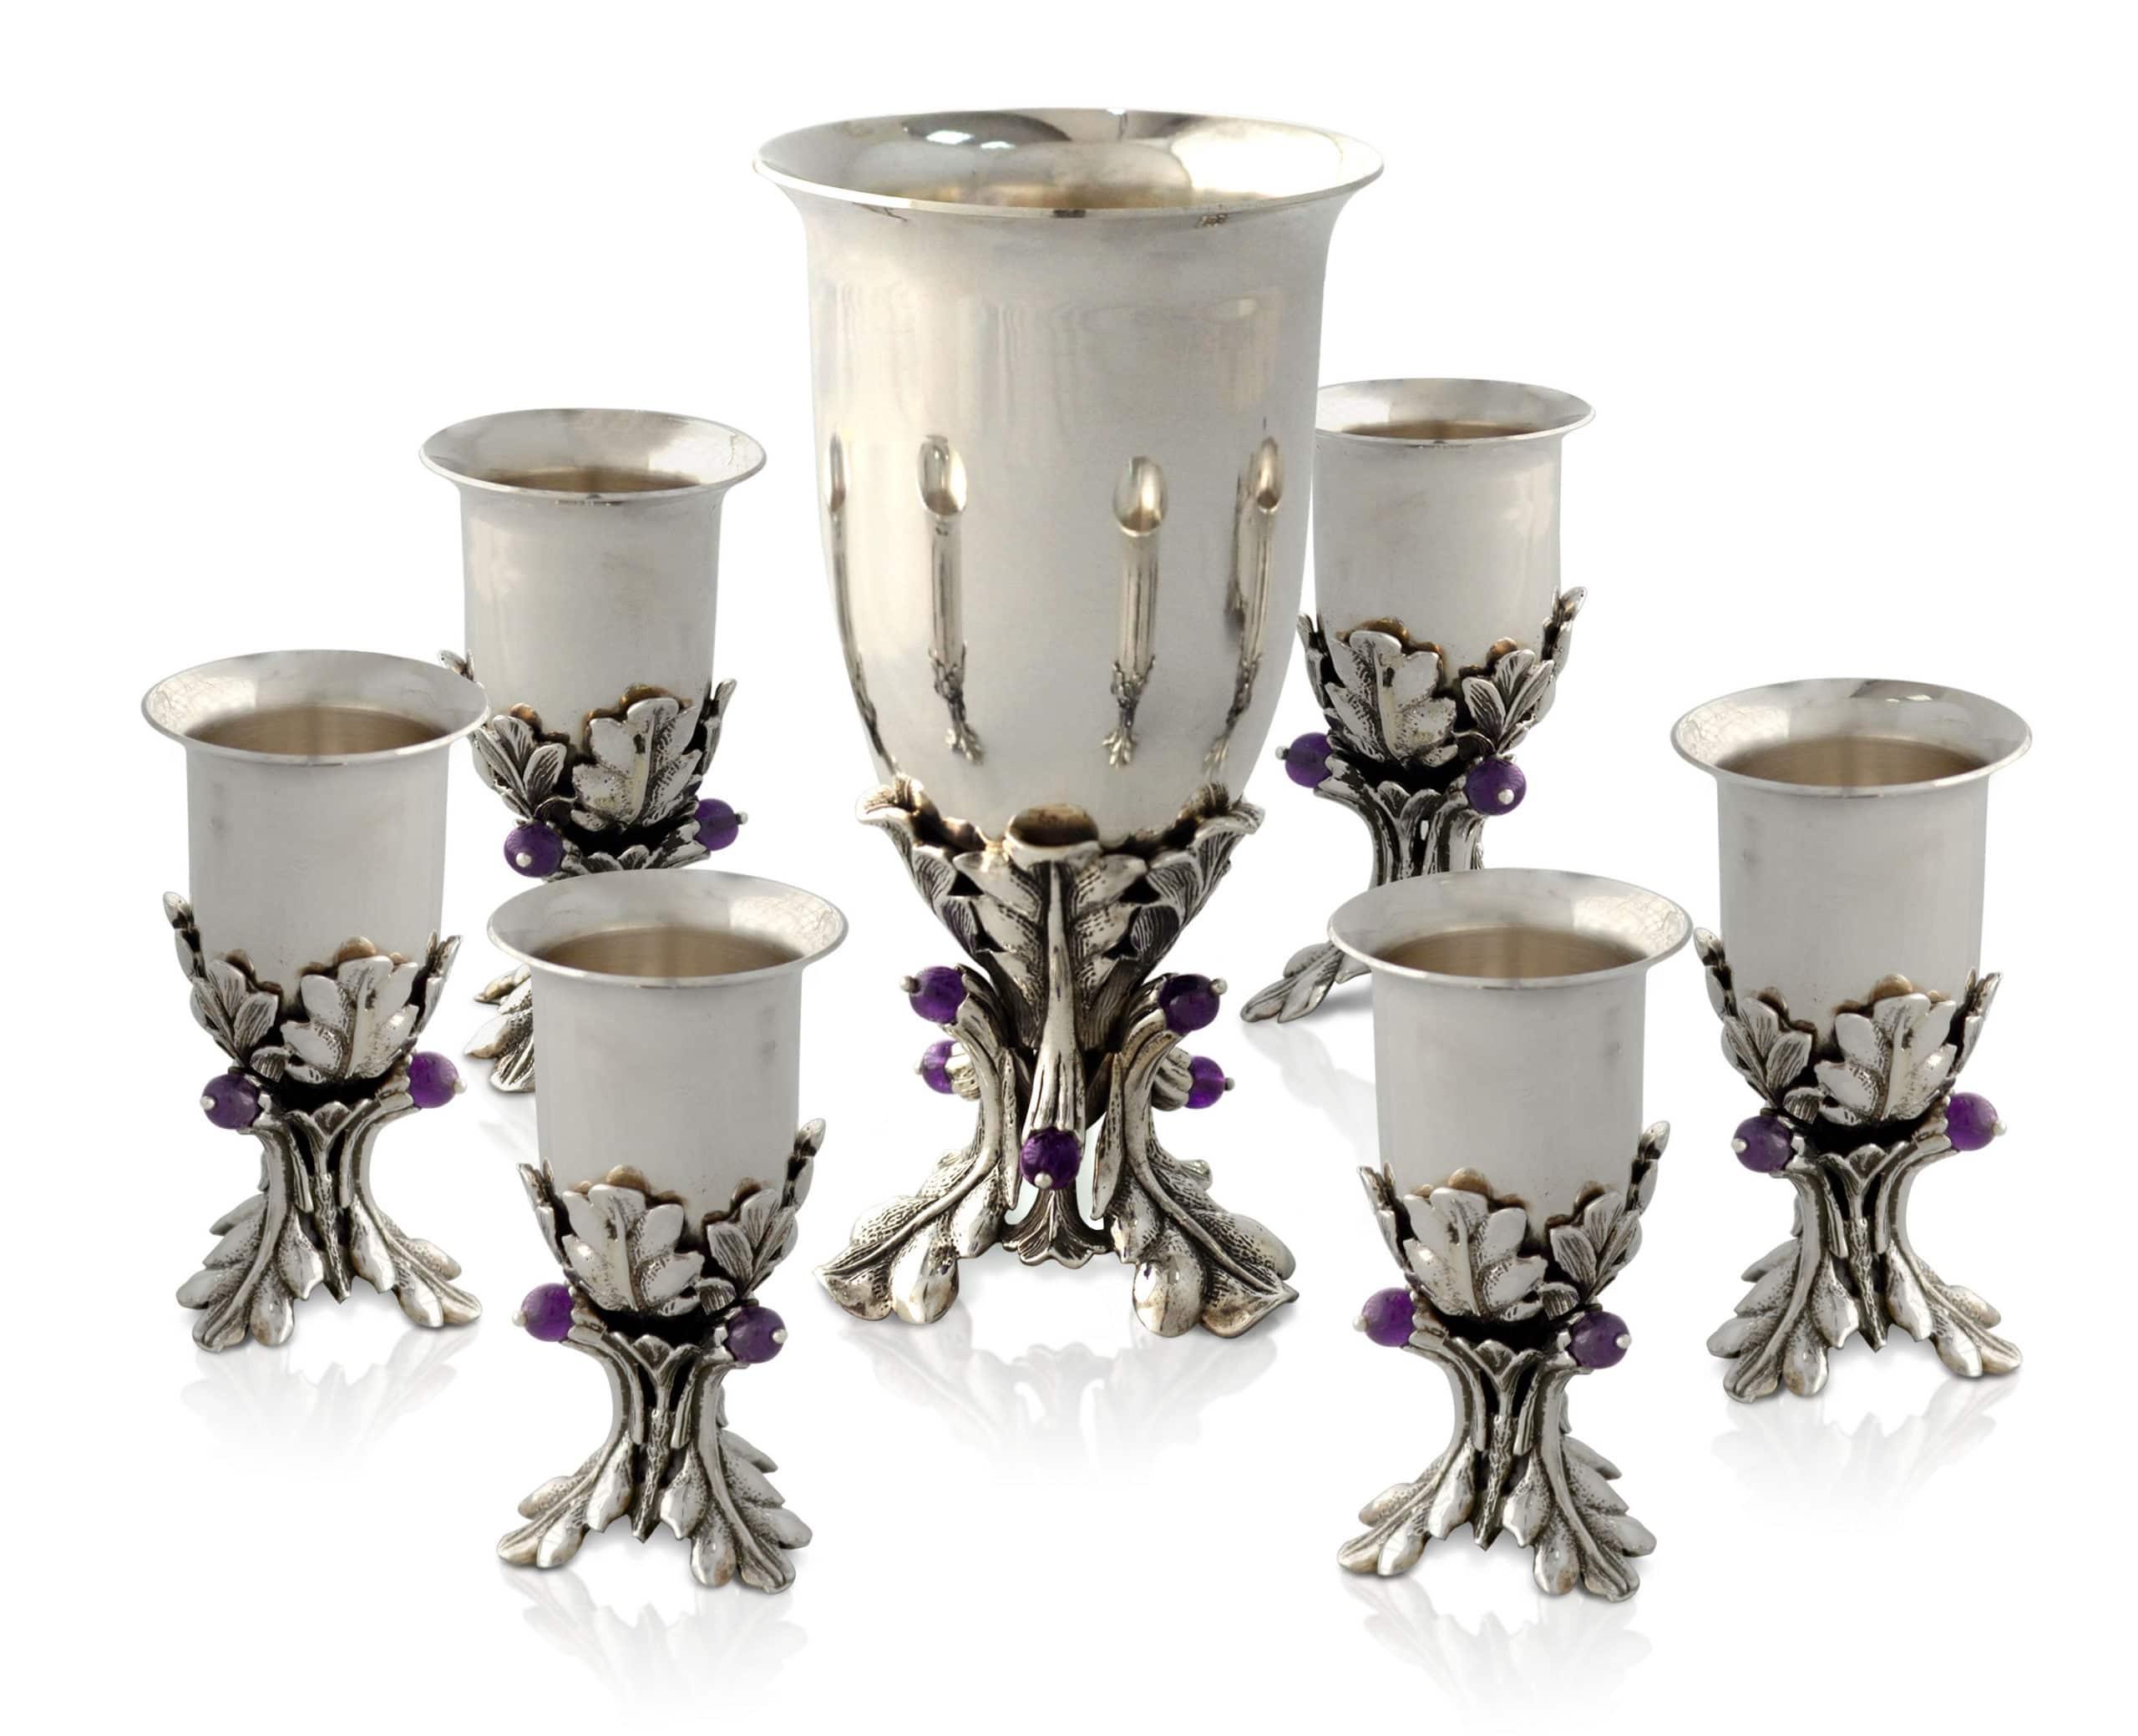 Kiddush Cup and Liqueur Set with Amethyst Stones